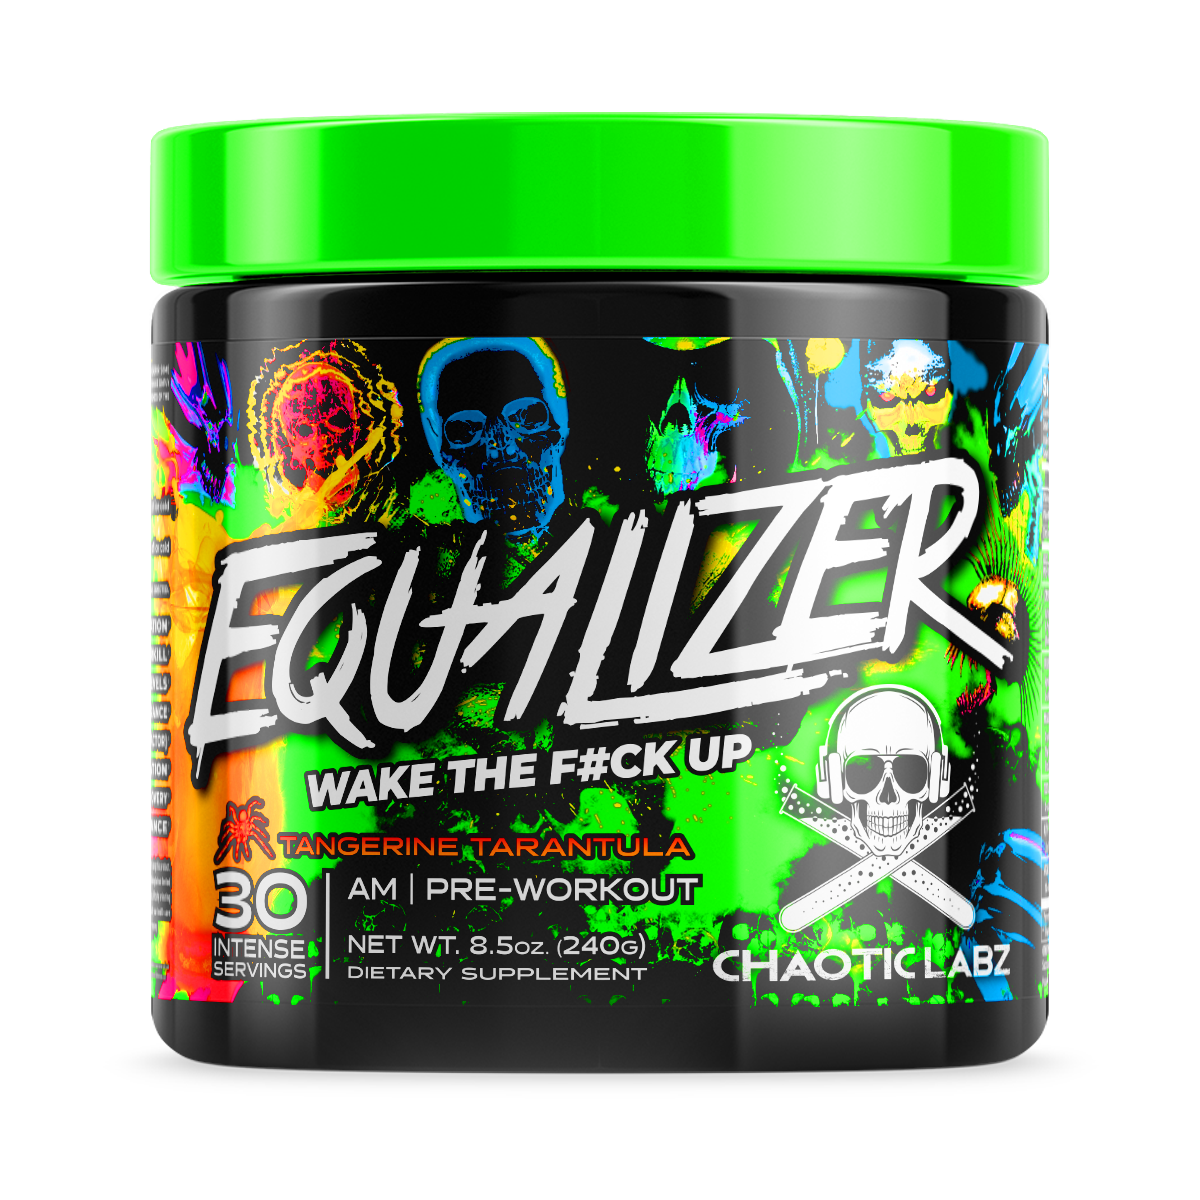 EQUALIZER / CHAOTIC LABZ